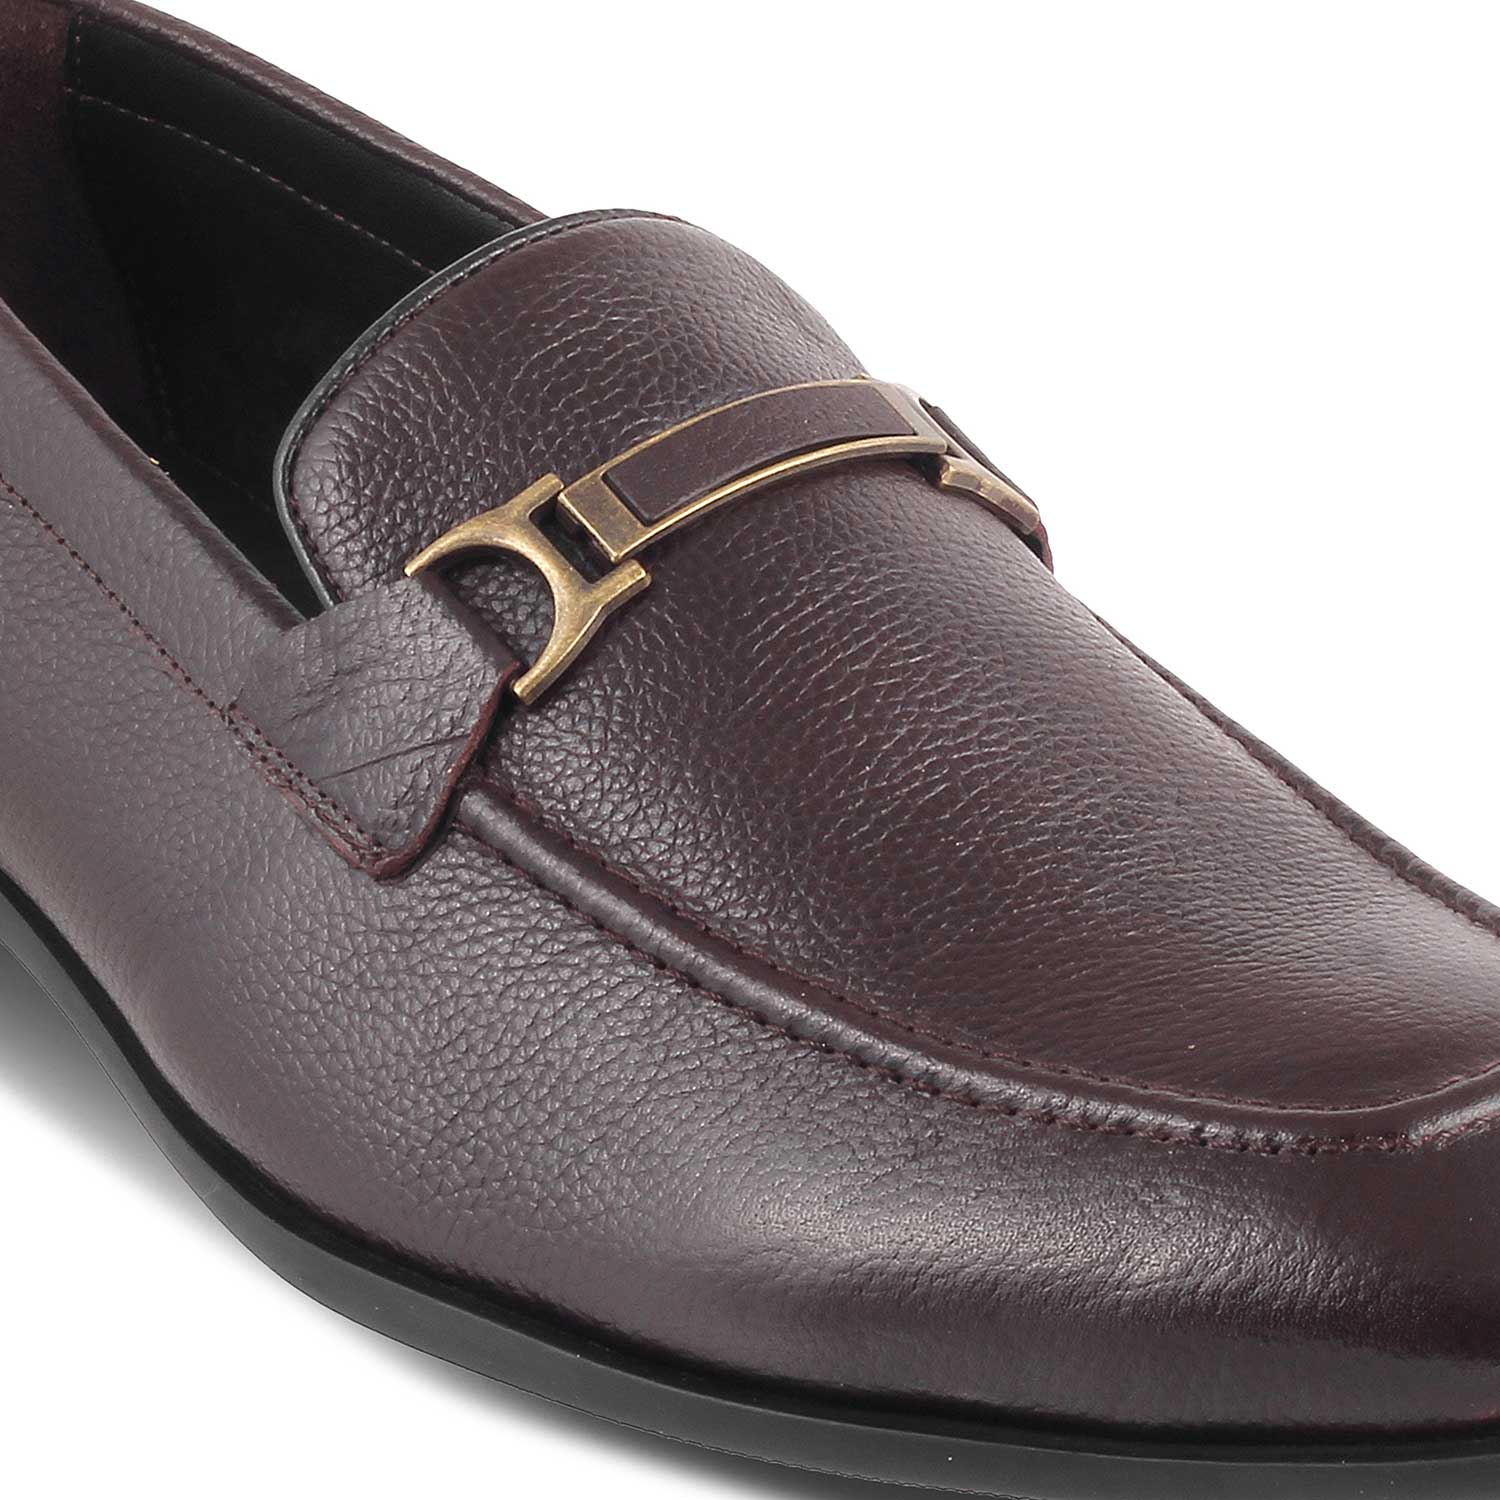 The Leven Brown Men's Leather Loafers Tresmode - Tresmode